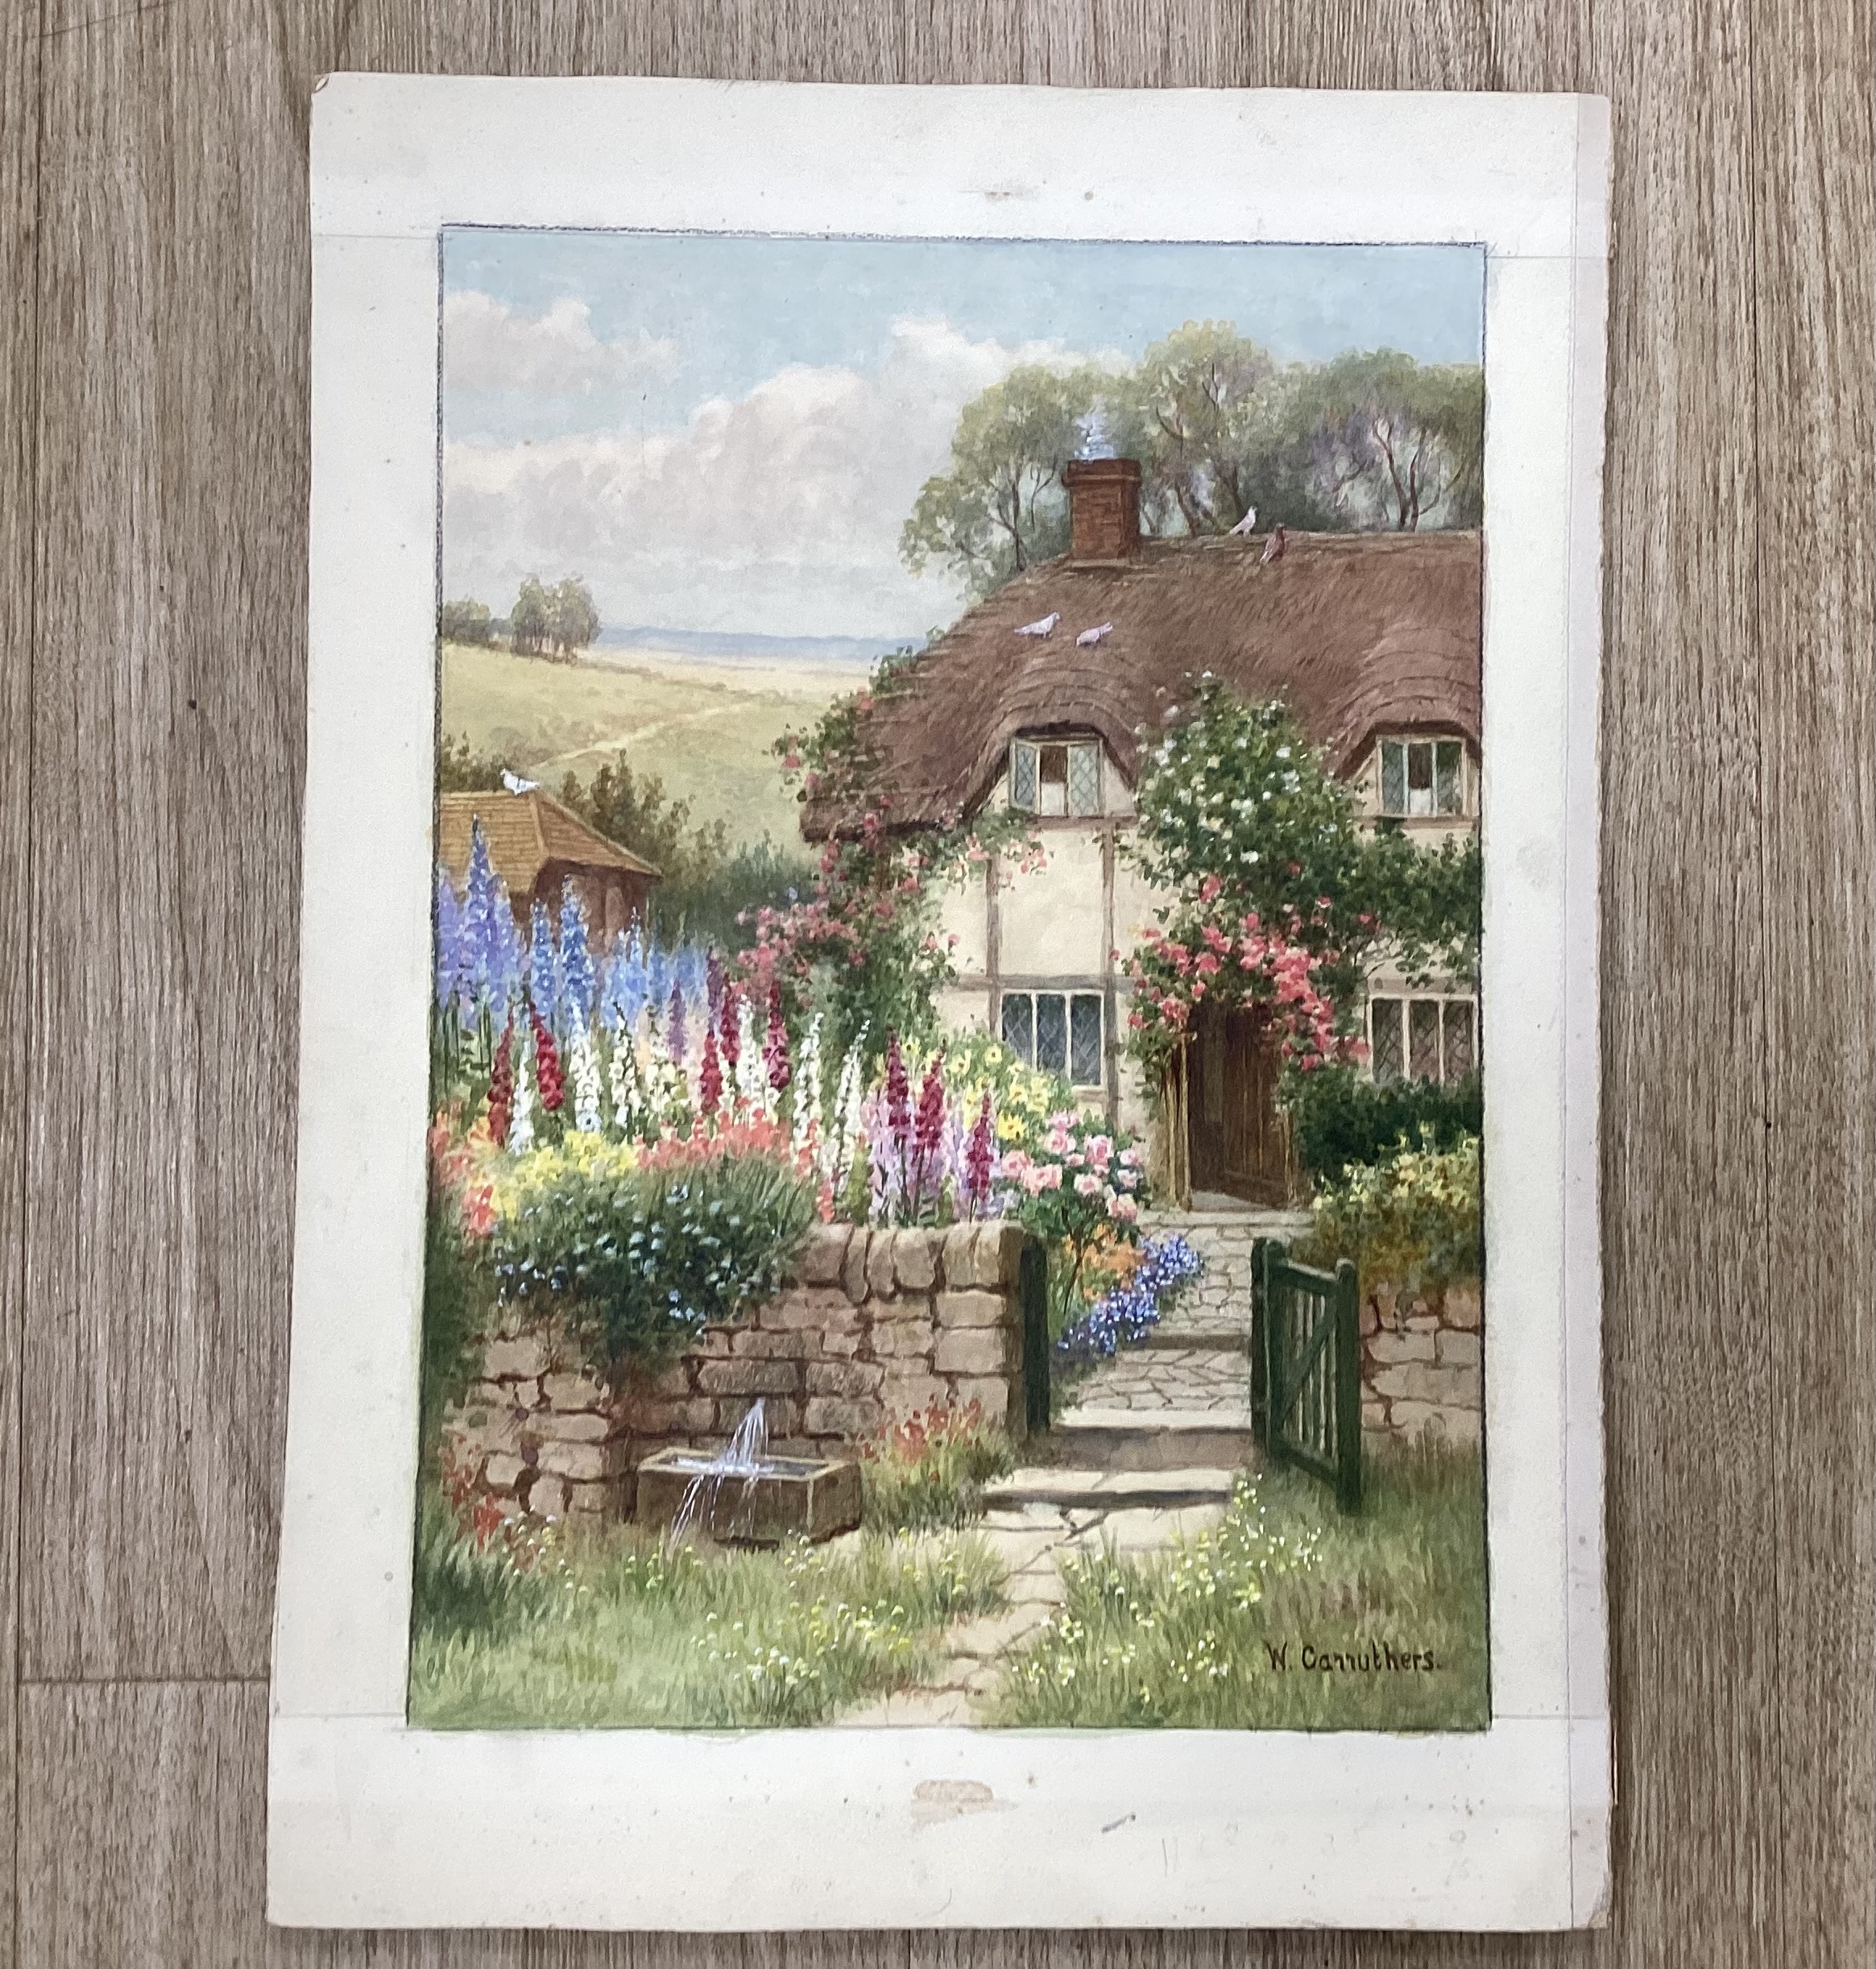 William Affleck (aka, William Carruthers, 1868-1943), two watercolours on card, ‘A cottage in Lambourne Valley, Berkshire’ and ‘An Old cottage near Chipping Campden, Gloucestershire’, each signed, 37 x 27cm, unframed